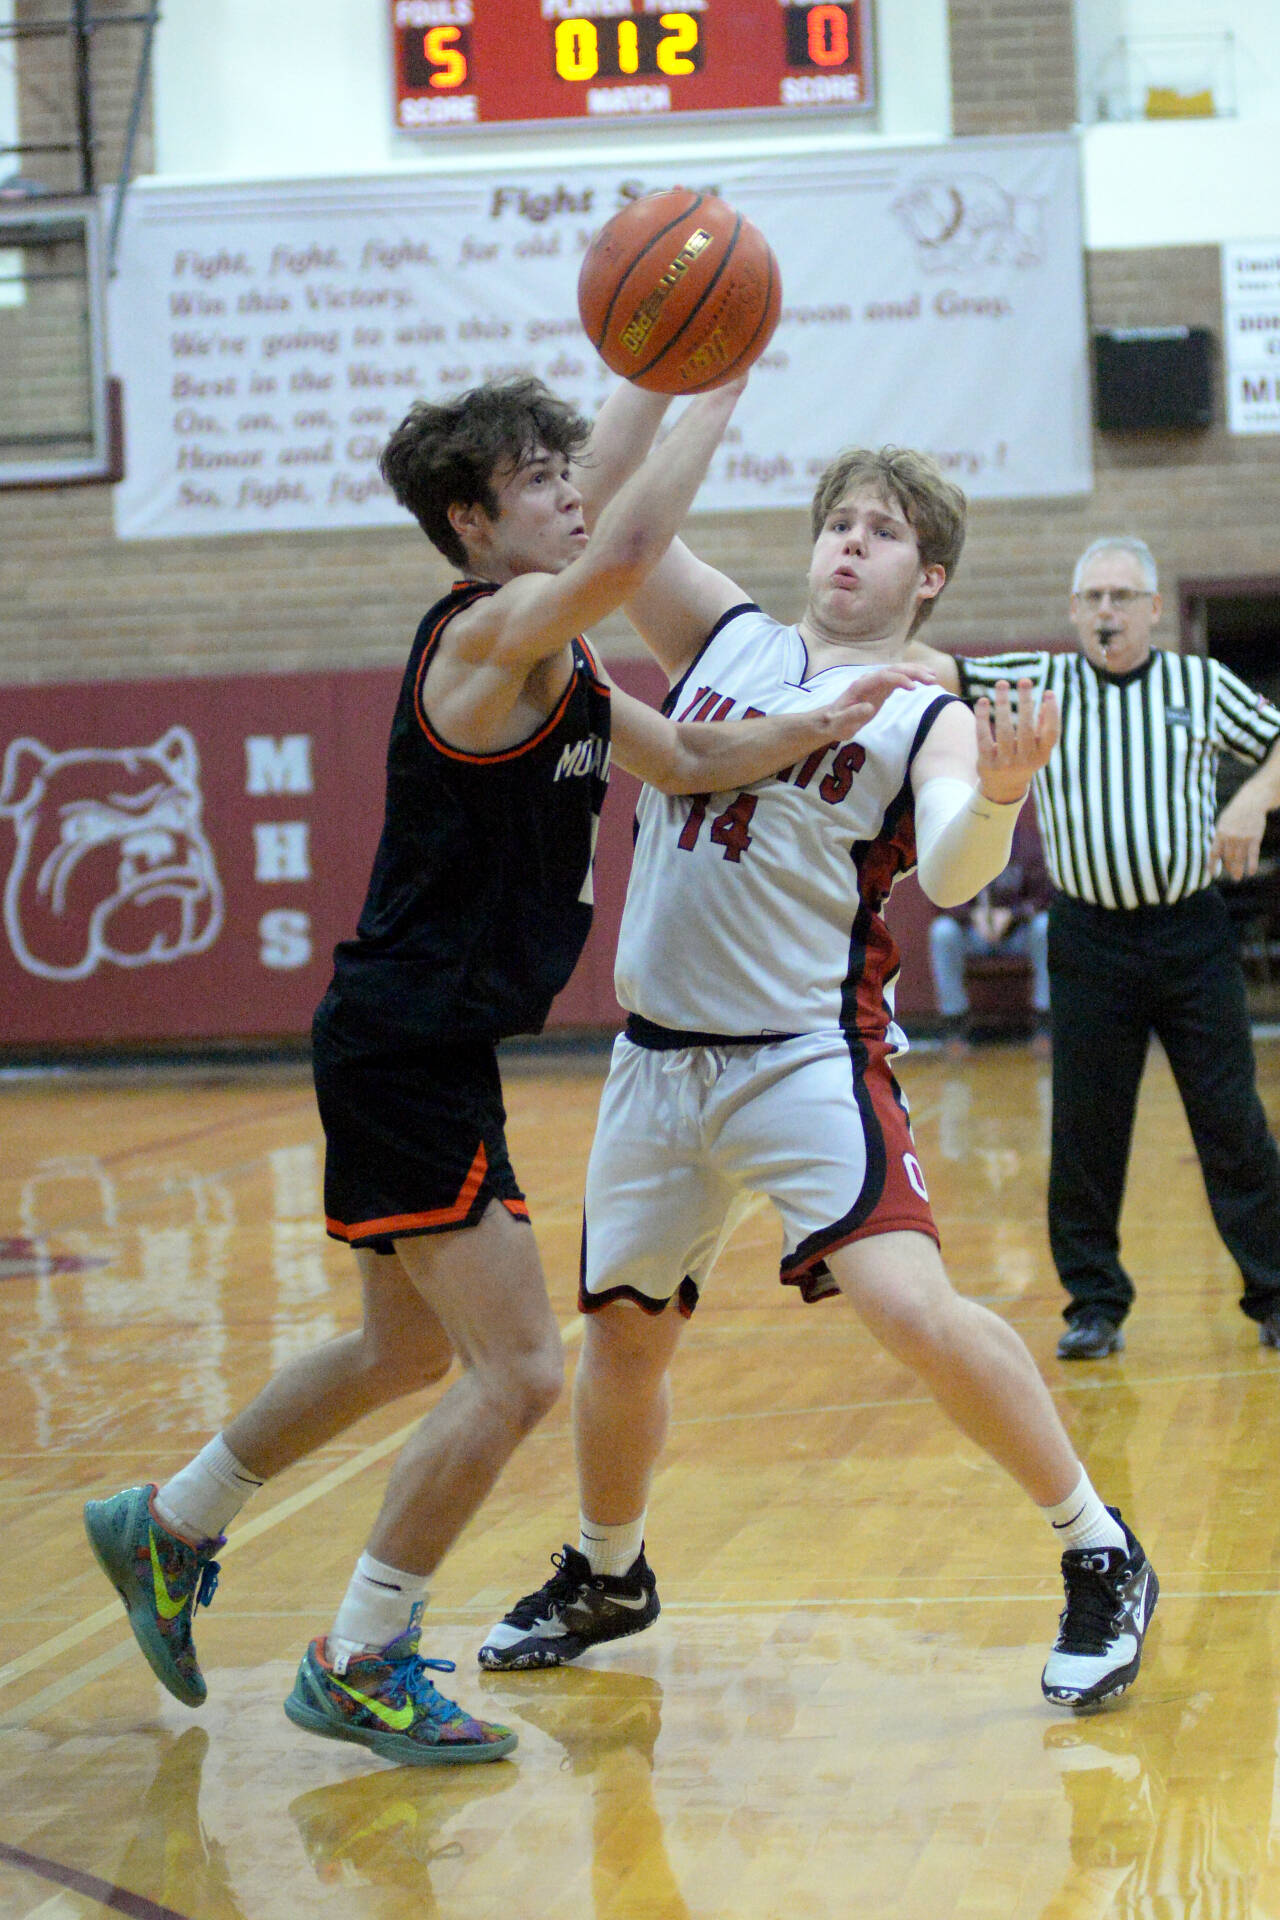 RYAN SPARKS | THE DAILY WORLD Ocosta’s Kayden Turner (14) attempts a pass while defended by Rainier’s Jake Meldrum during the Wildcats’ 64-62 loss in the first round of the 2B District 4 Tournament on Saturday at Montesano High School.